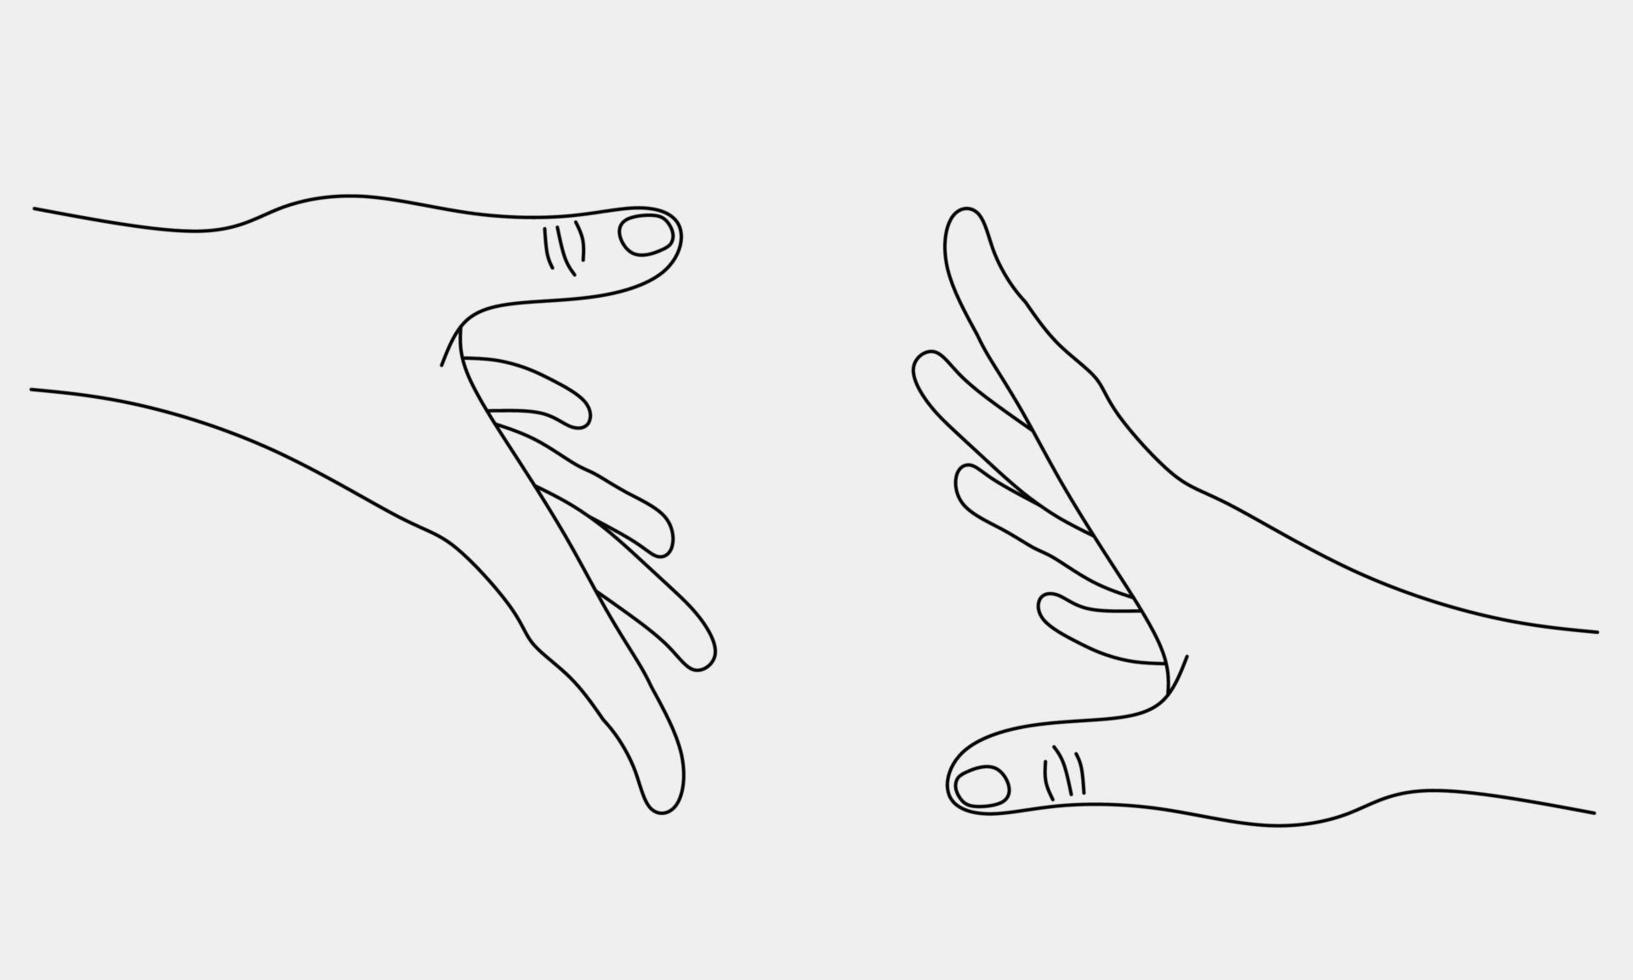 Two hands gesture reach each other minimal line art doodle style vector design element